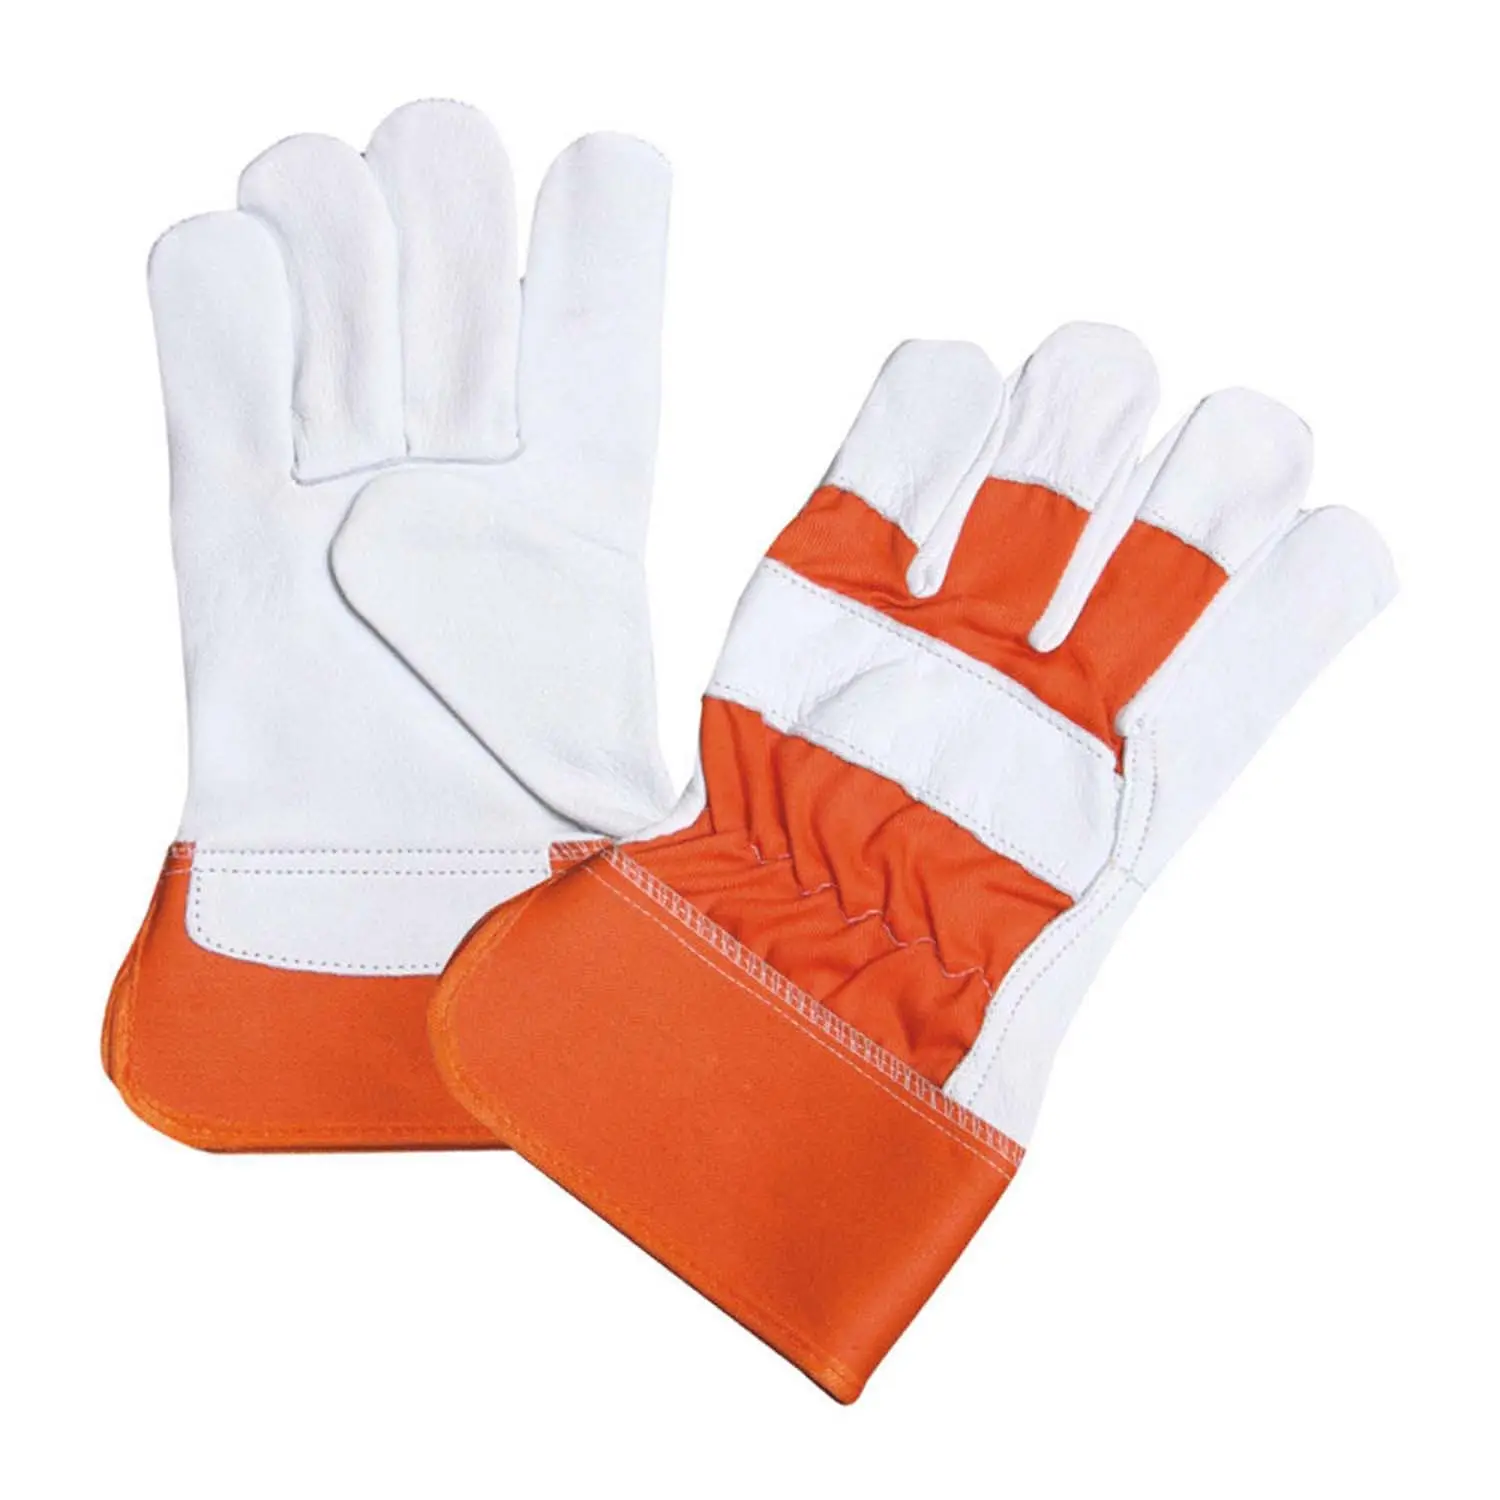 Cow split leather Safety working gloves / Hot sale Personal Protective Equipment Cow Split Leather General Purpose Work Gloves